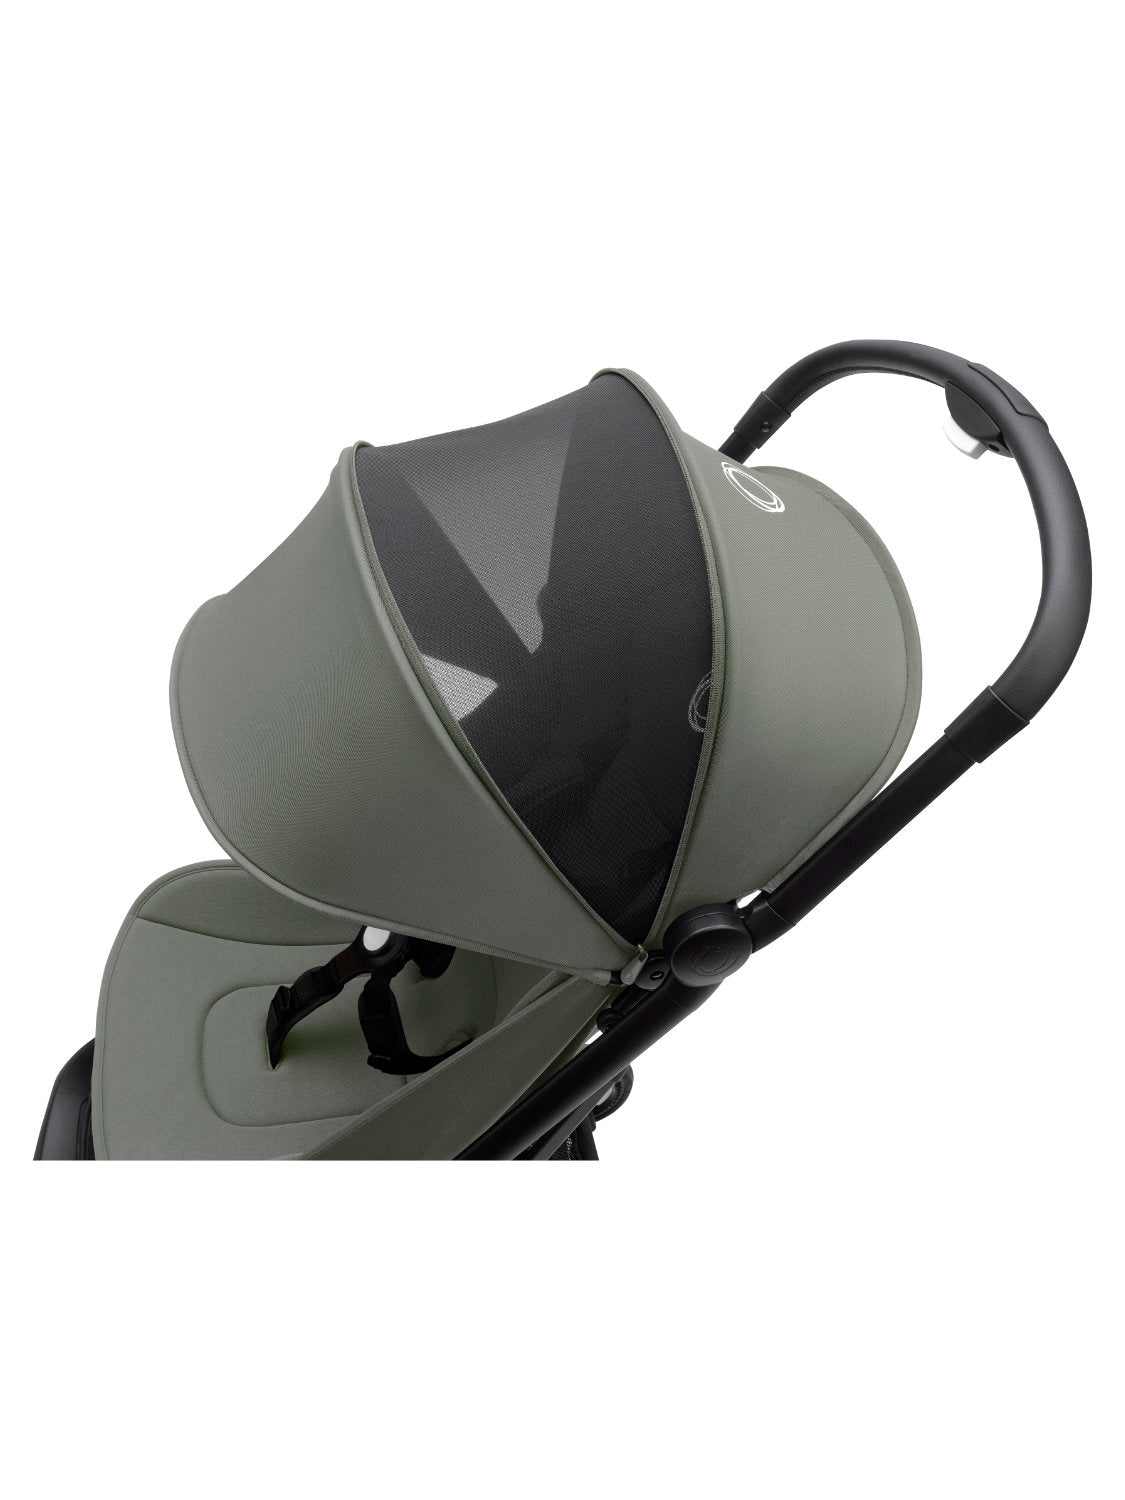 Butterfly Complete Reisebuggy - Black Forest Green